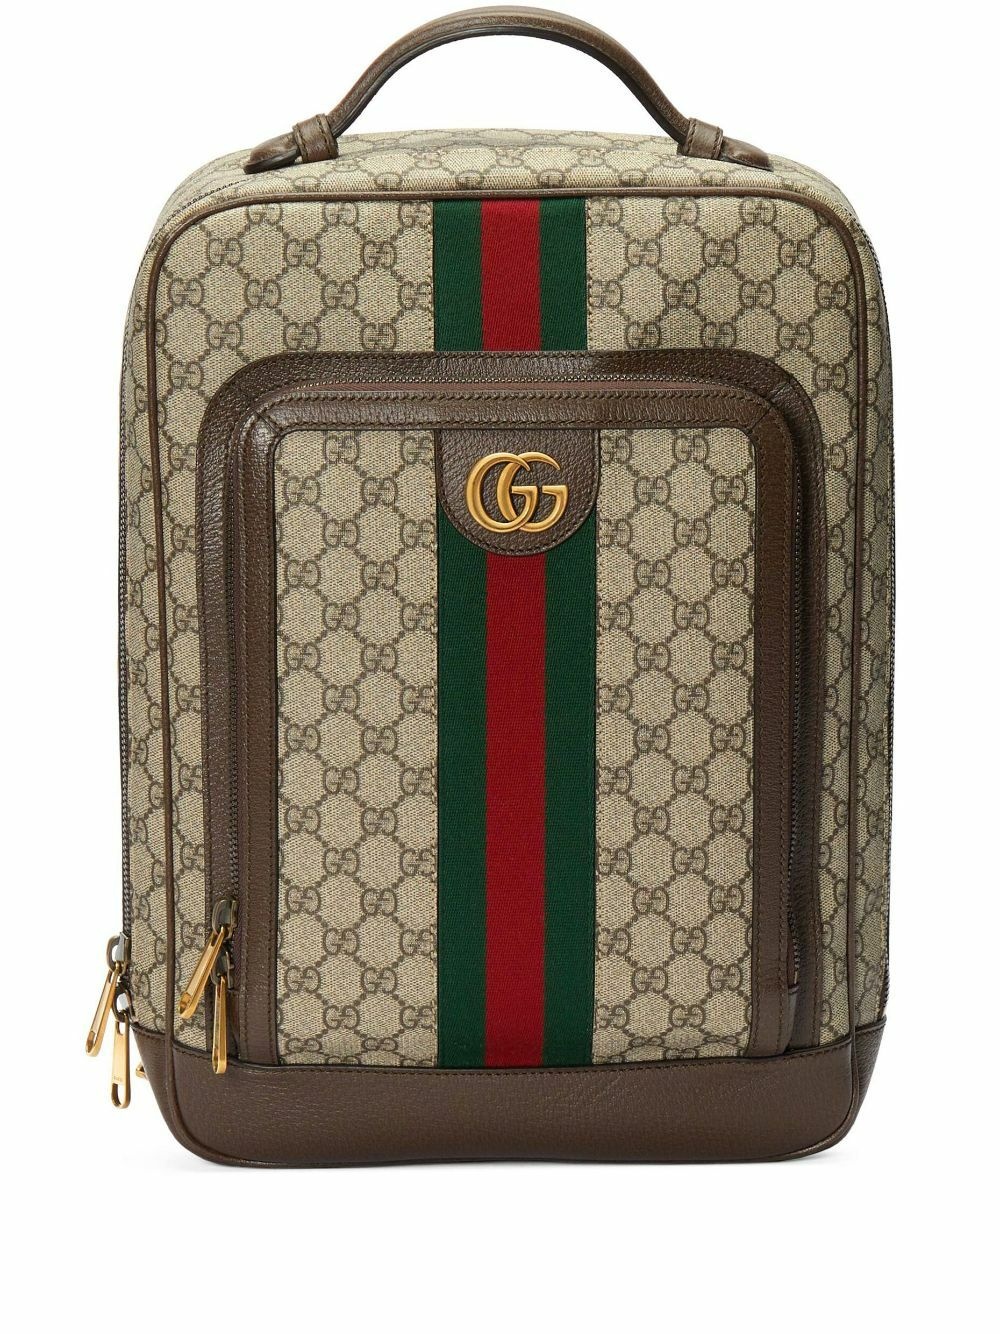 Gucci Ophidia Gg Jumbo Shopping Bag in Natural